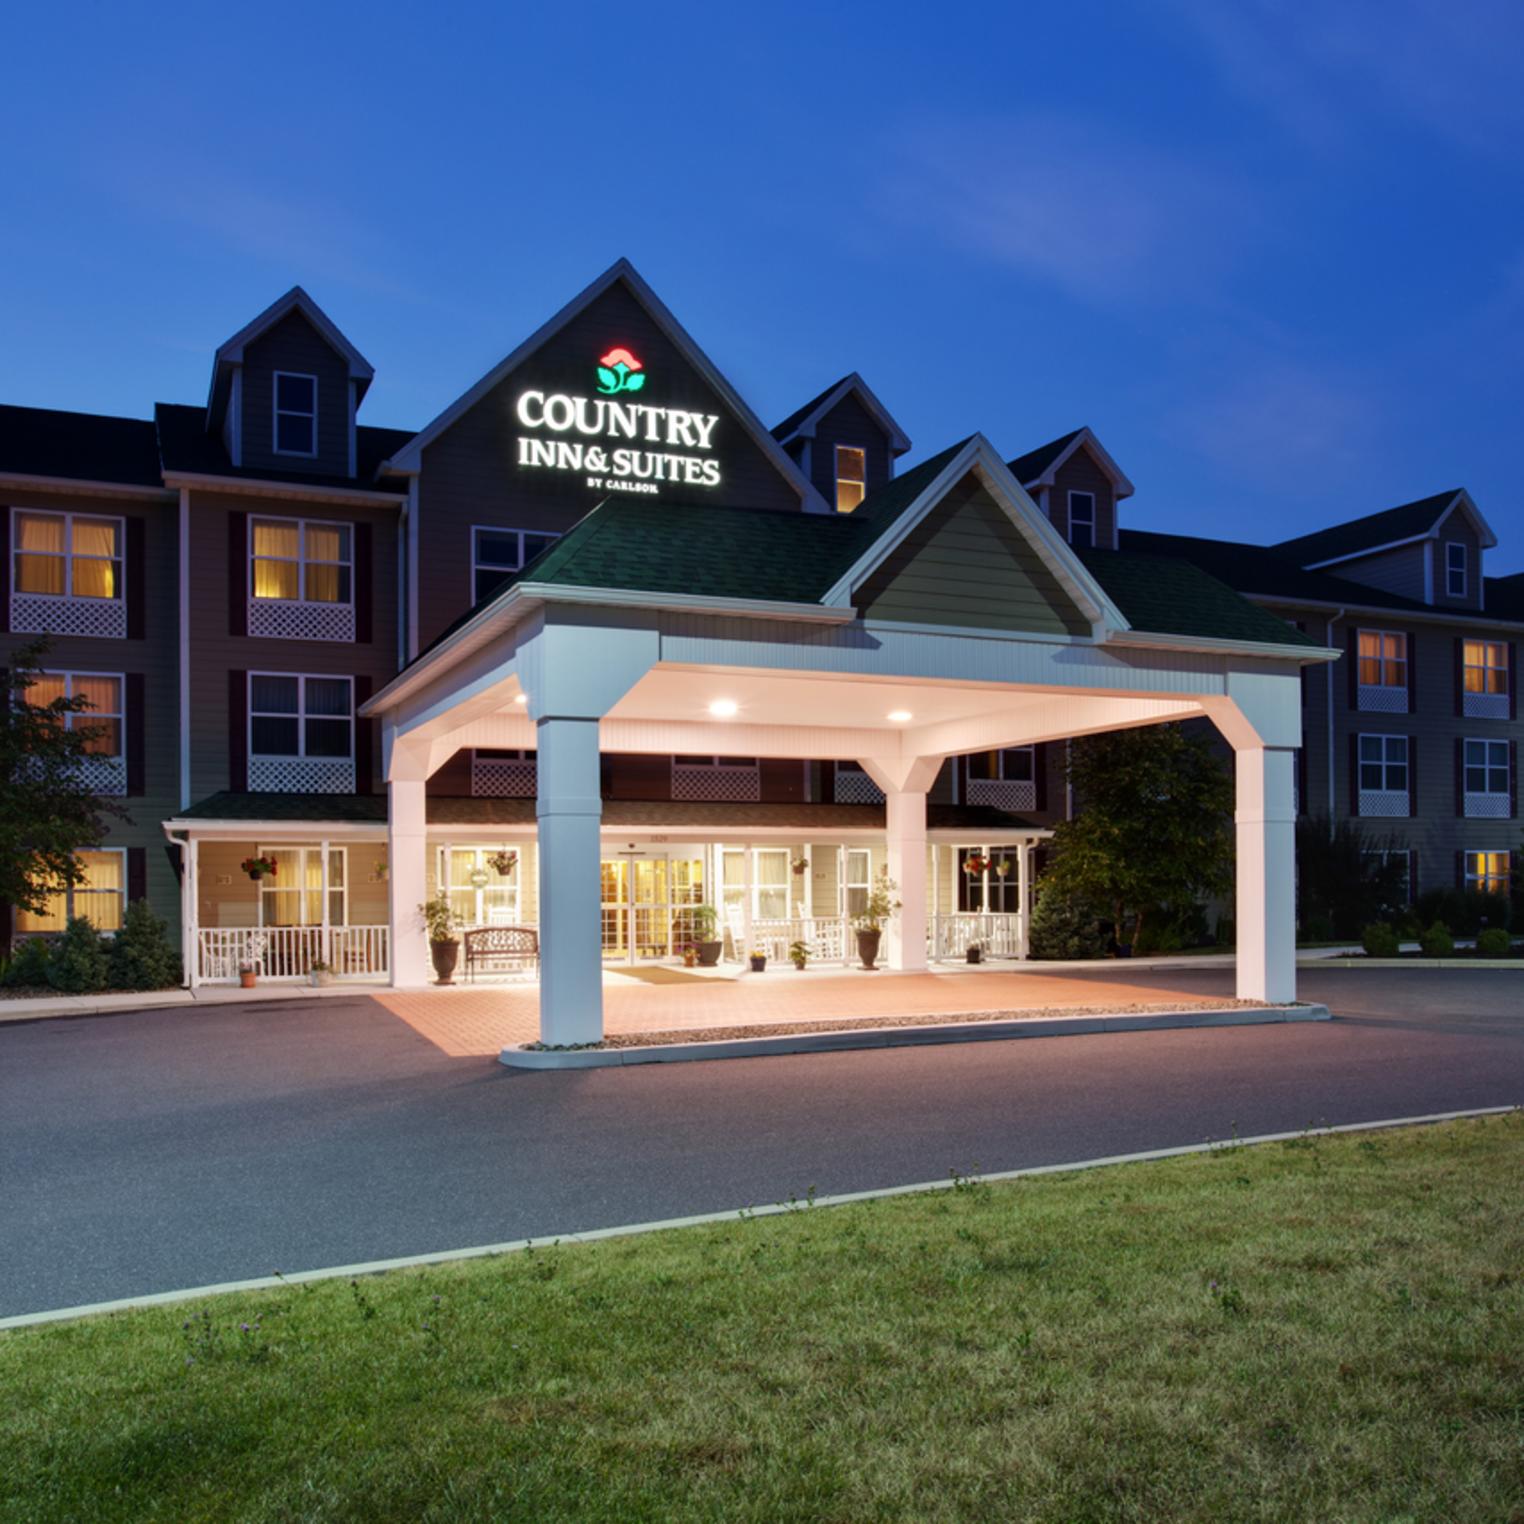 Country Inn and Suites Front Exterior Twilight